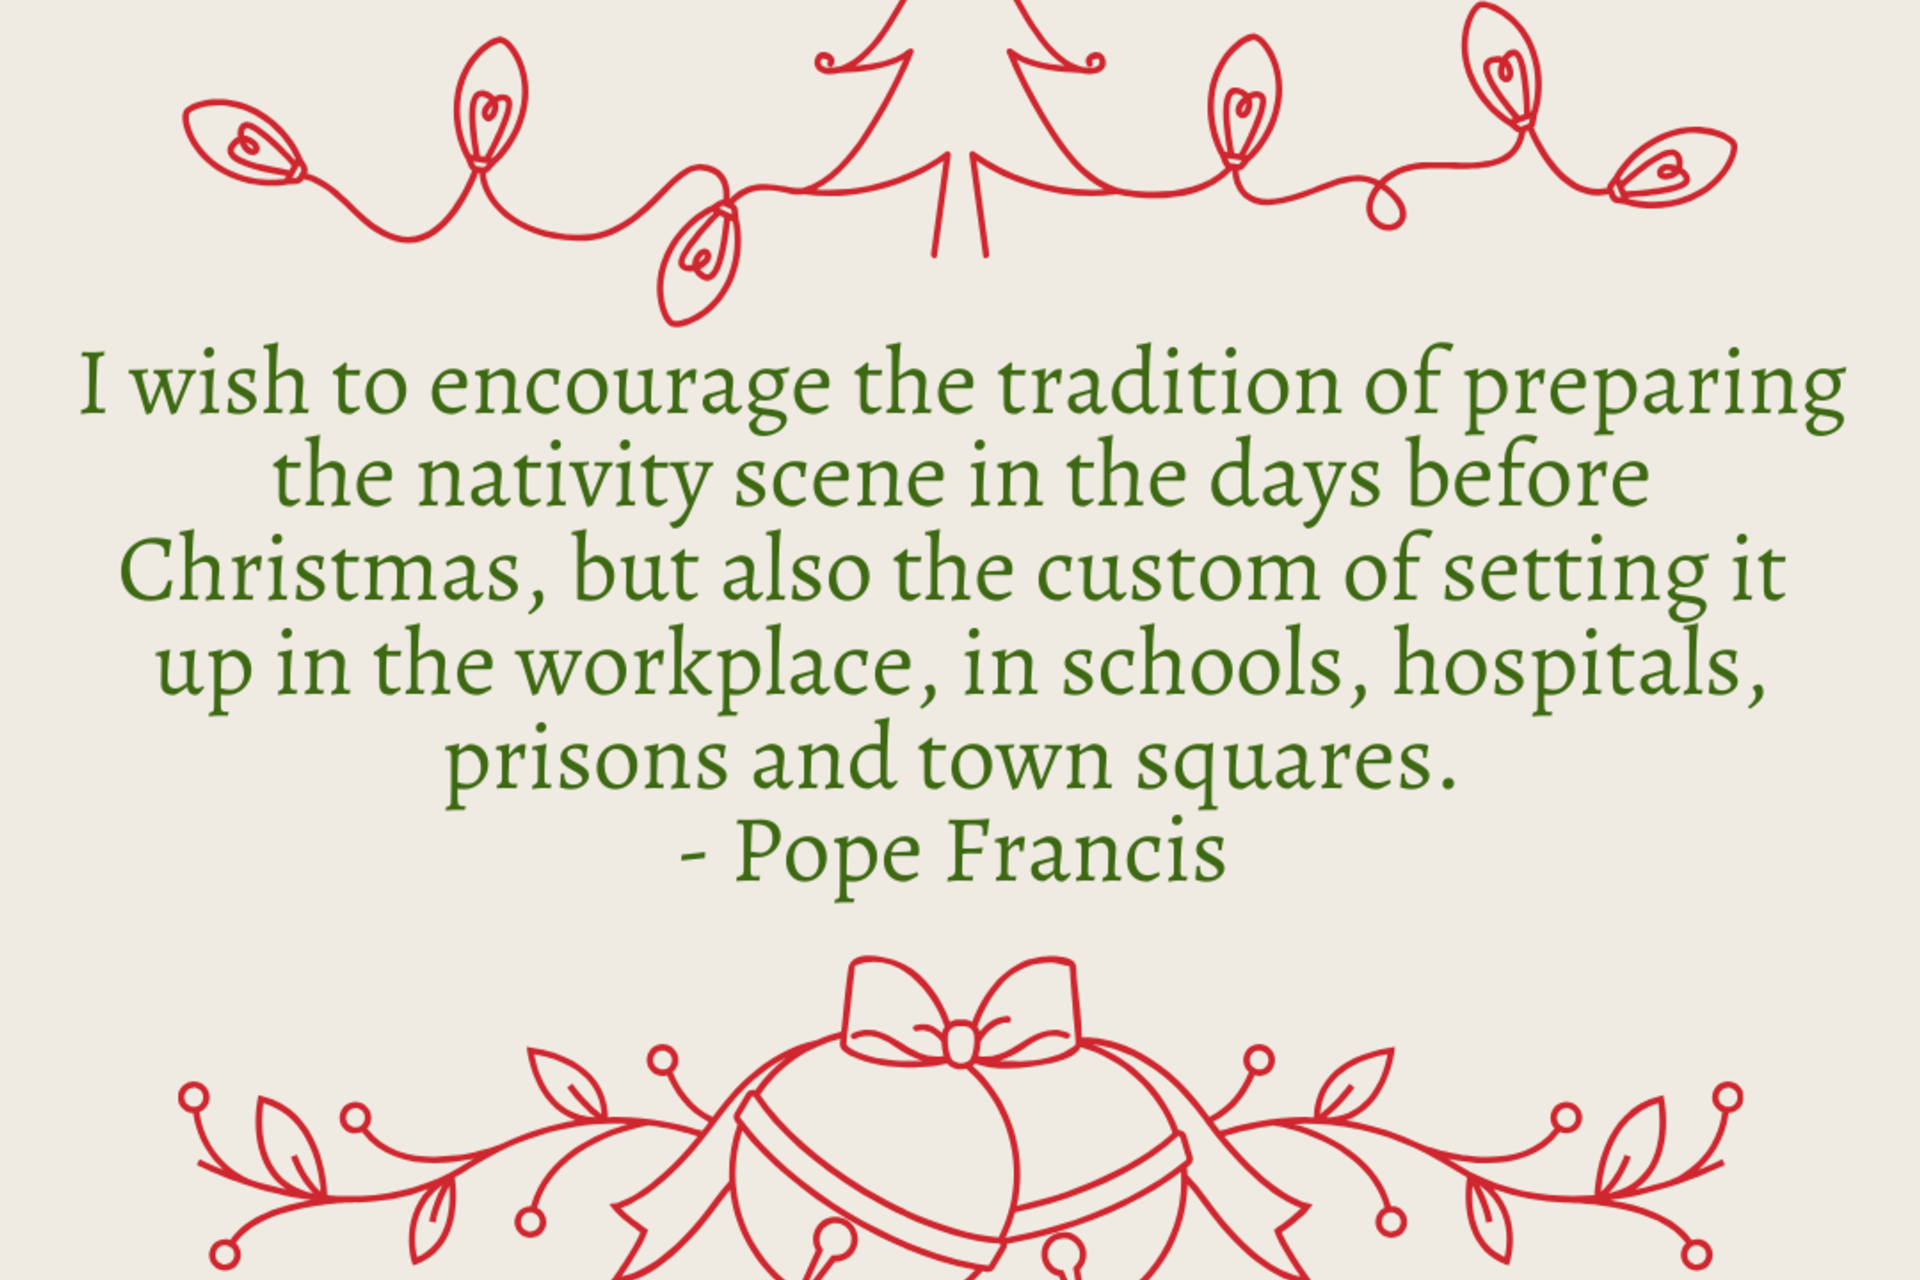 Pope Francis writes Apostolic Letter on the meaning and importance of the nativity scene